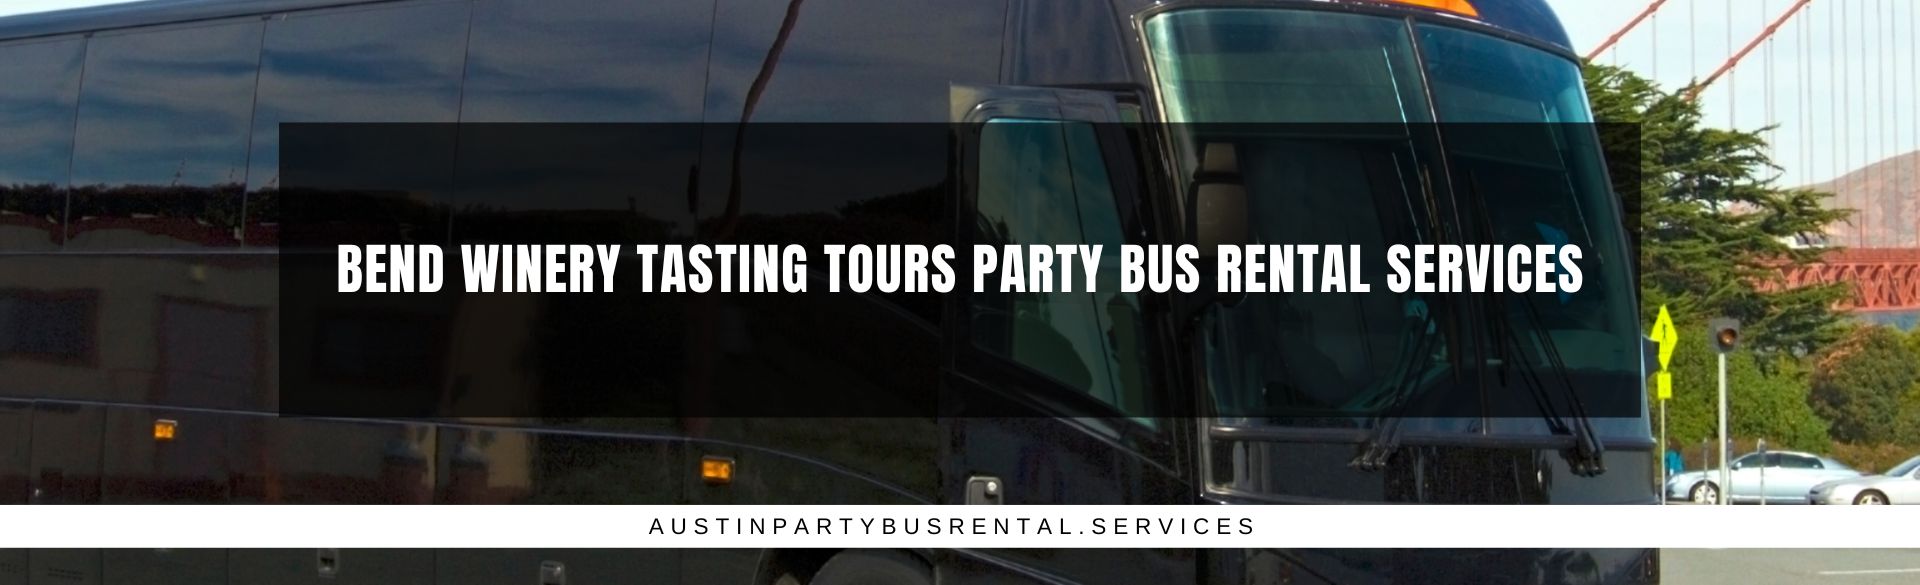 Bend Winery Tasting Tours Party Bus Rental Services